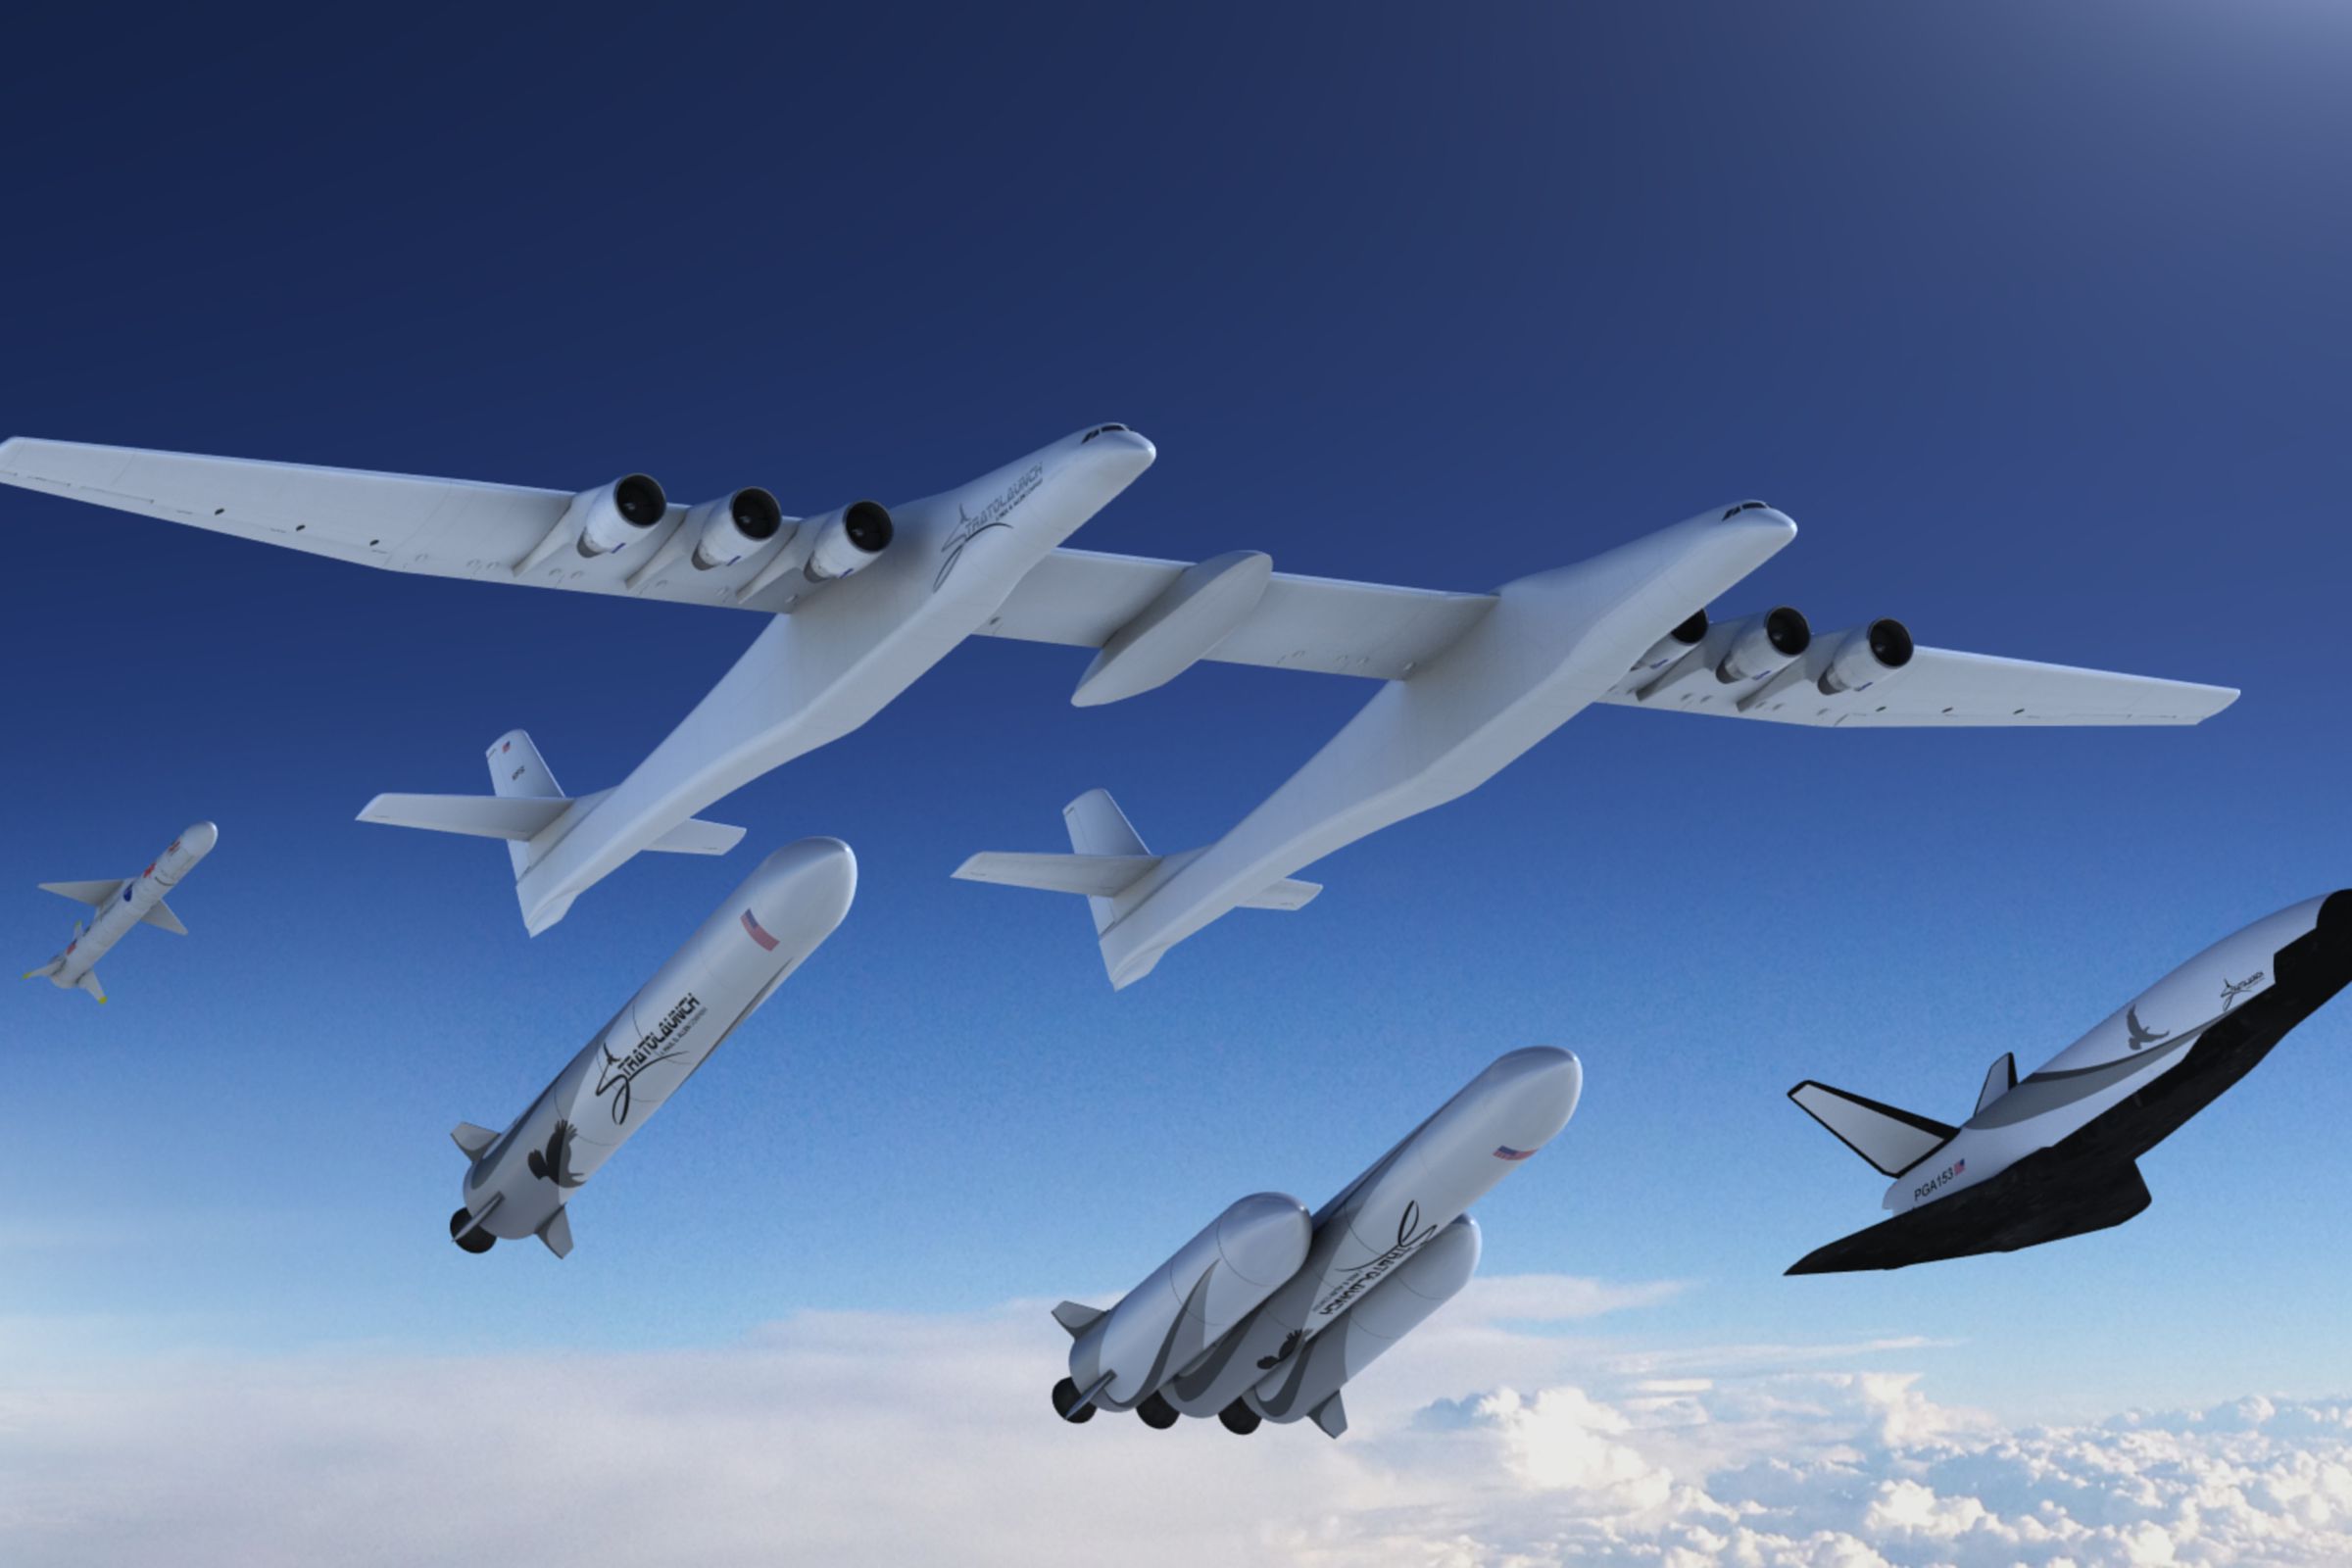 Renderings of Stratolaunch’s massive plane and the vehicles it will carry.